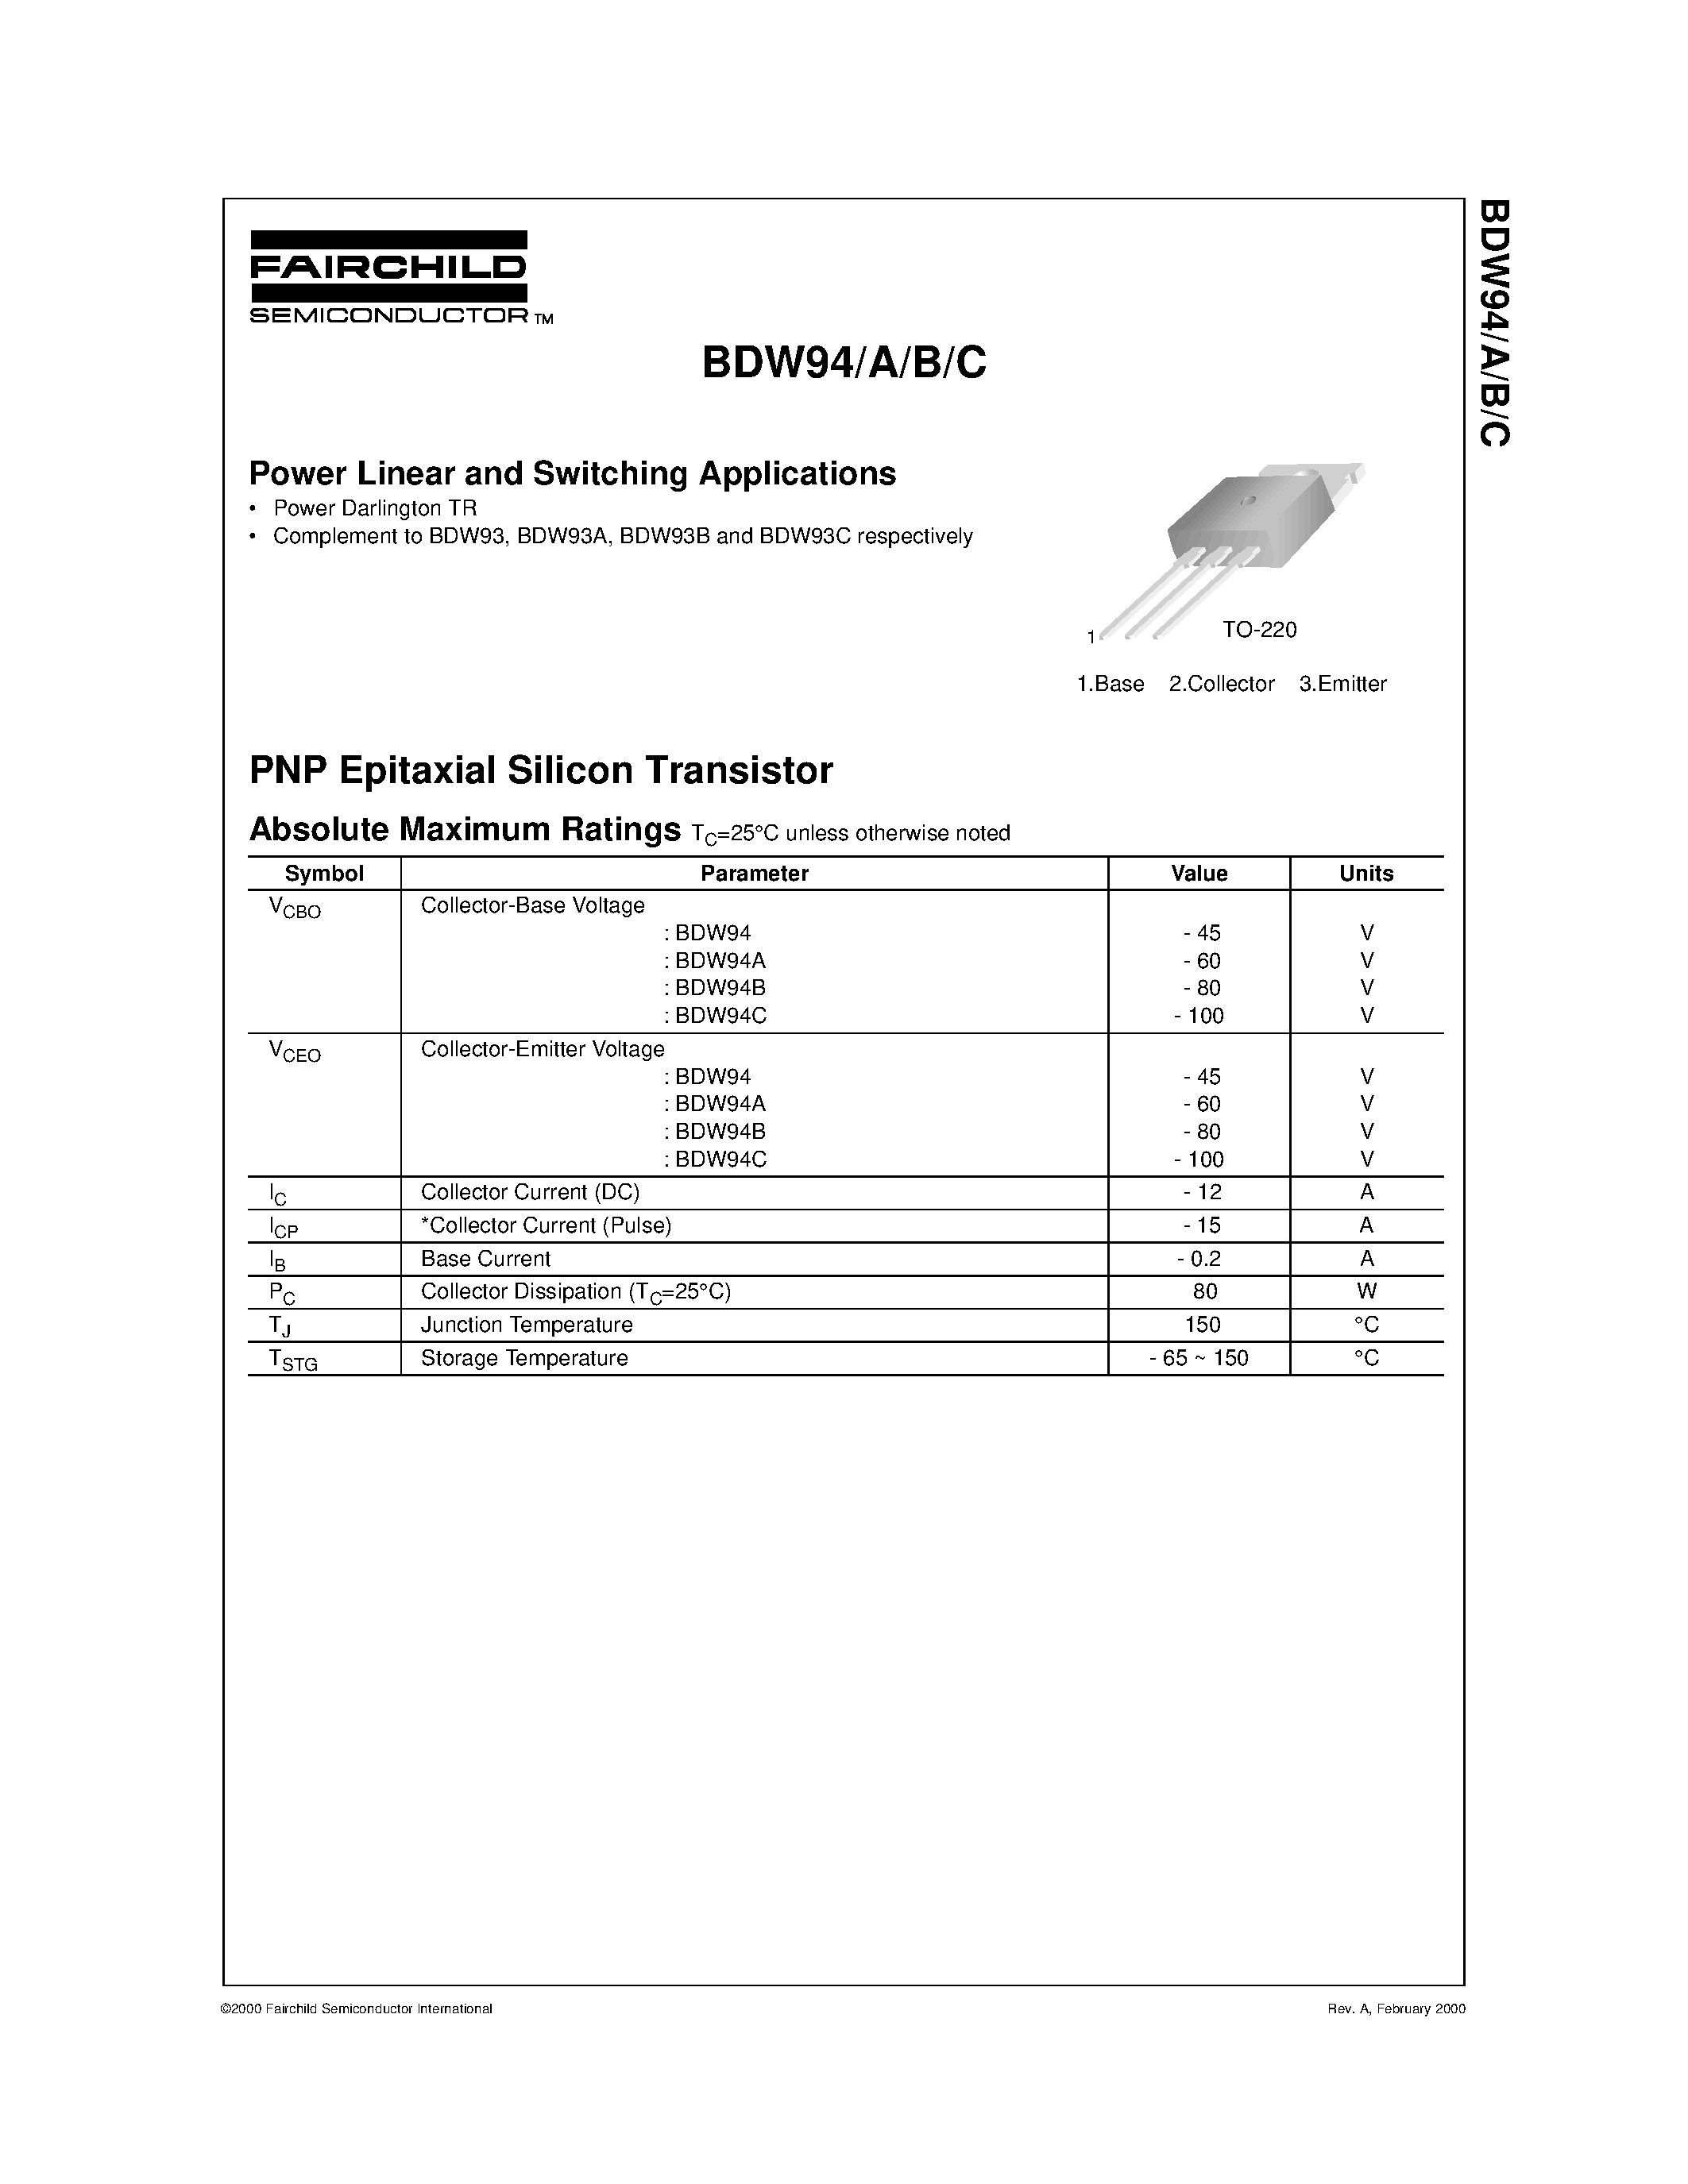 Datasheet BDW94 - Power Linear and Switching Applications page 1